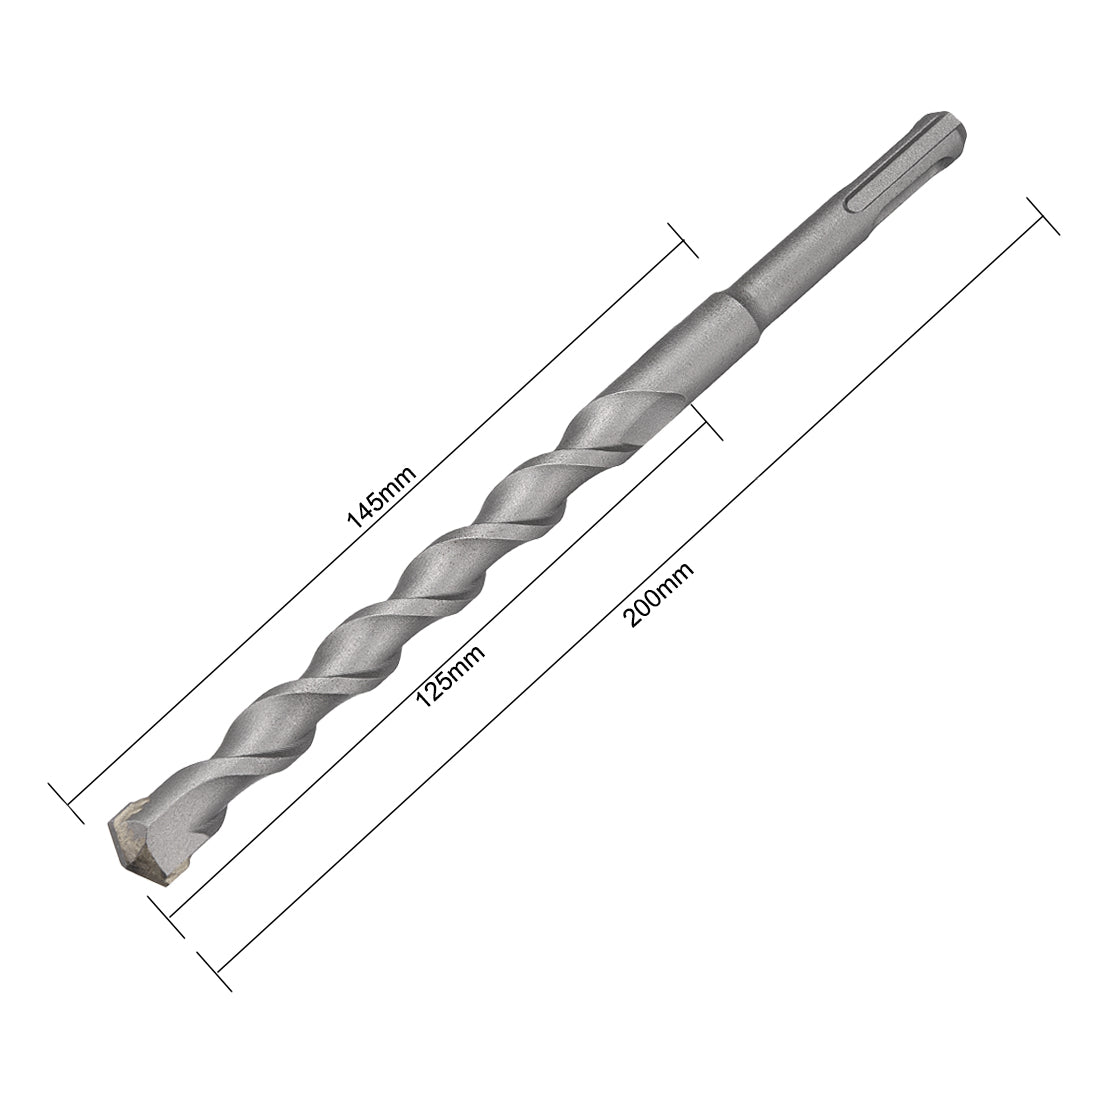 uxcell Uxcell Masonry Drill Bit 14mmx200mm 10mm Round Shank for Impact Drill